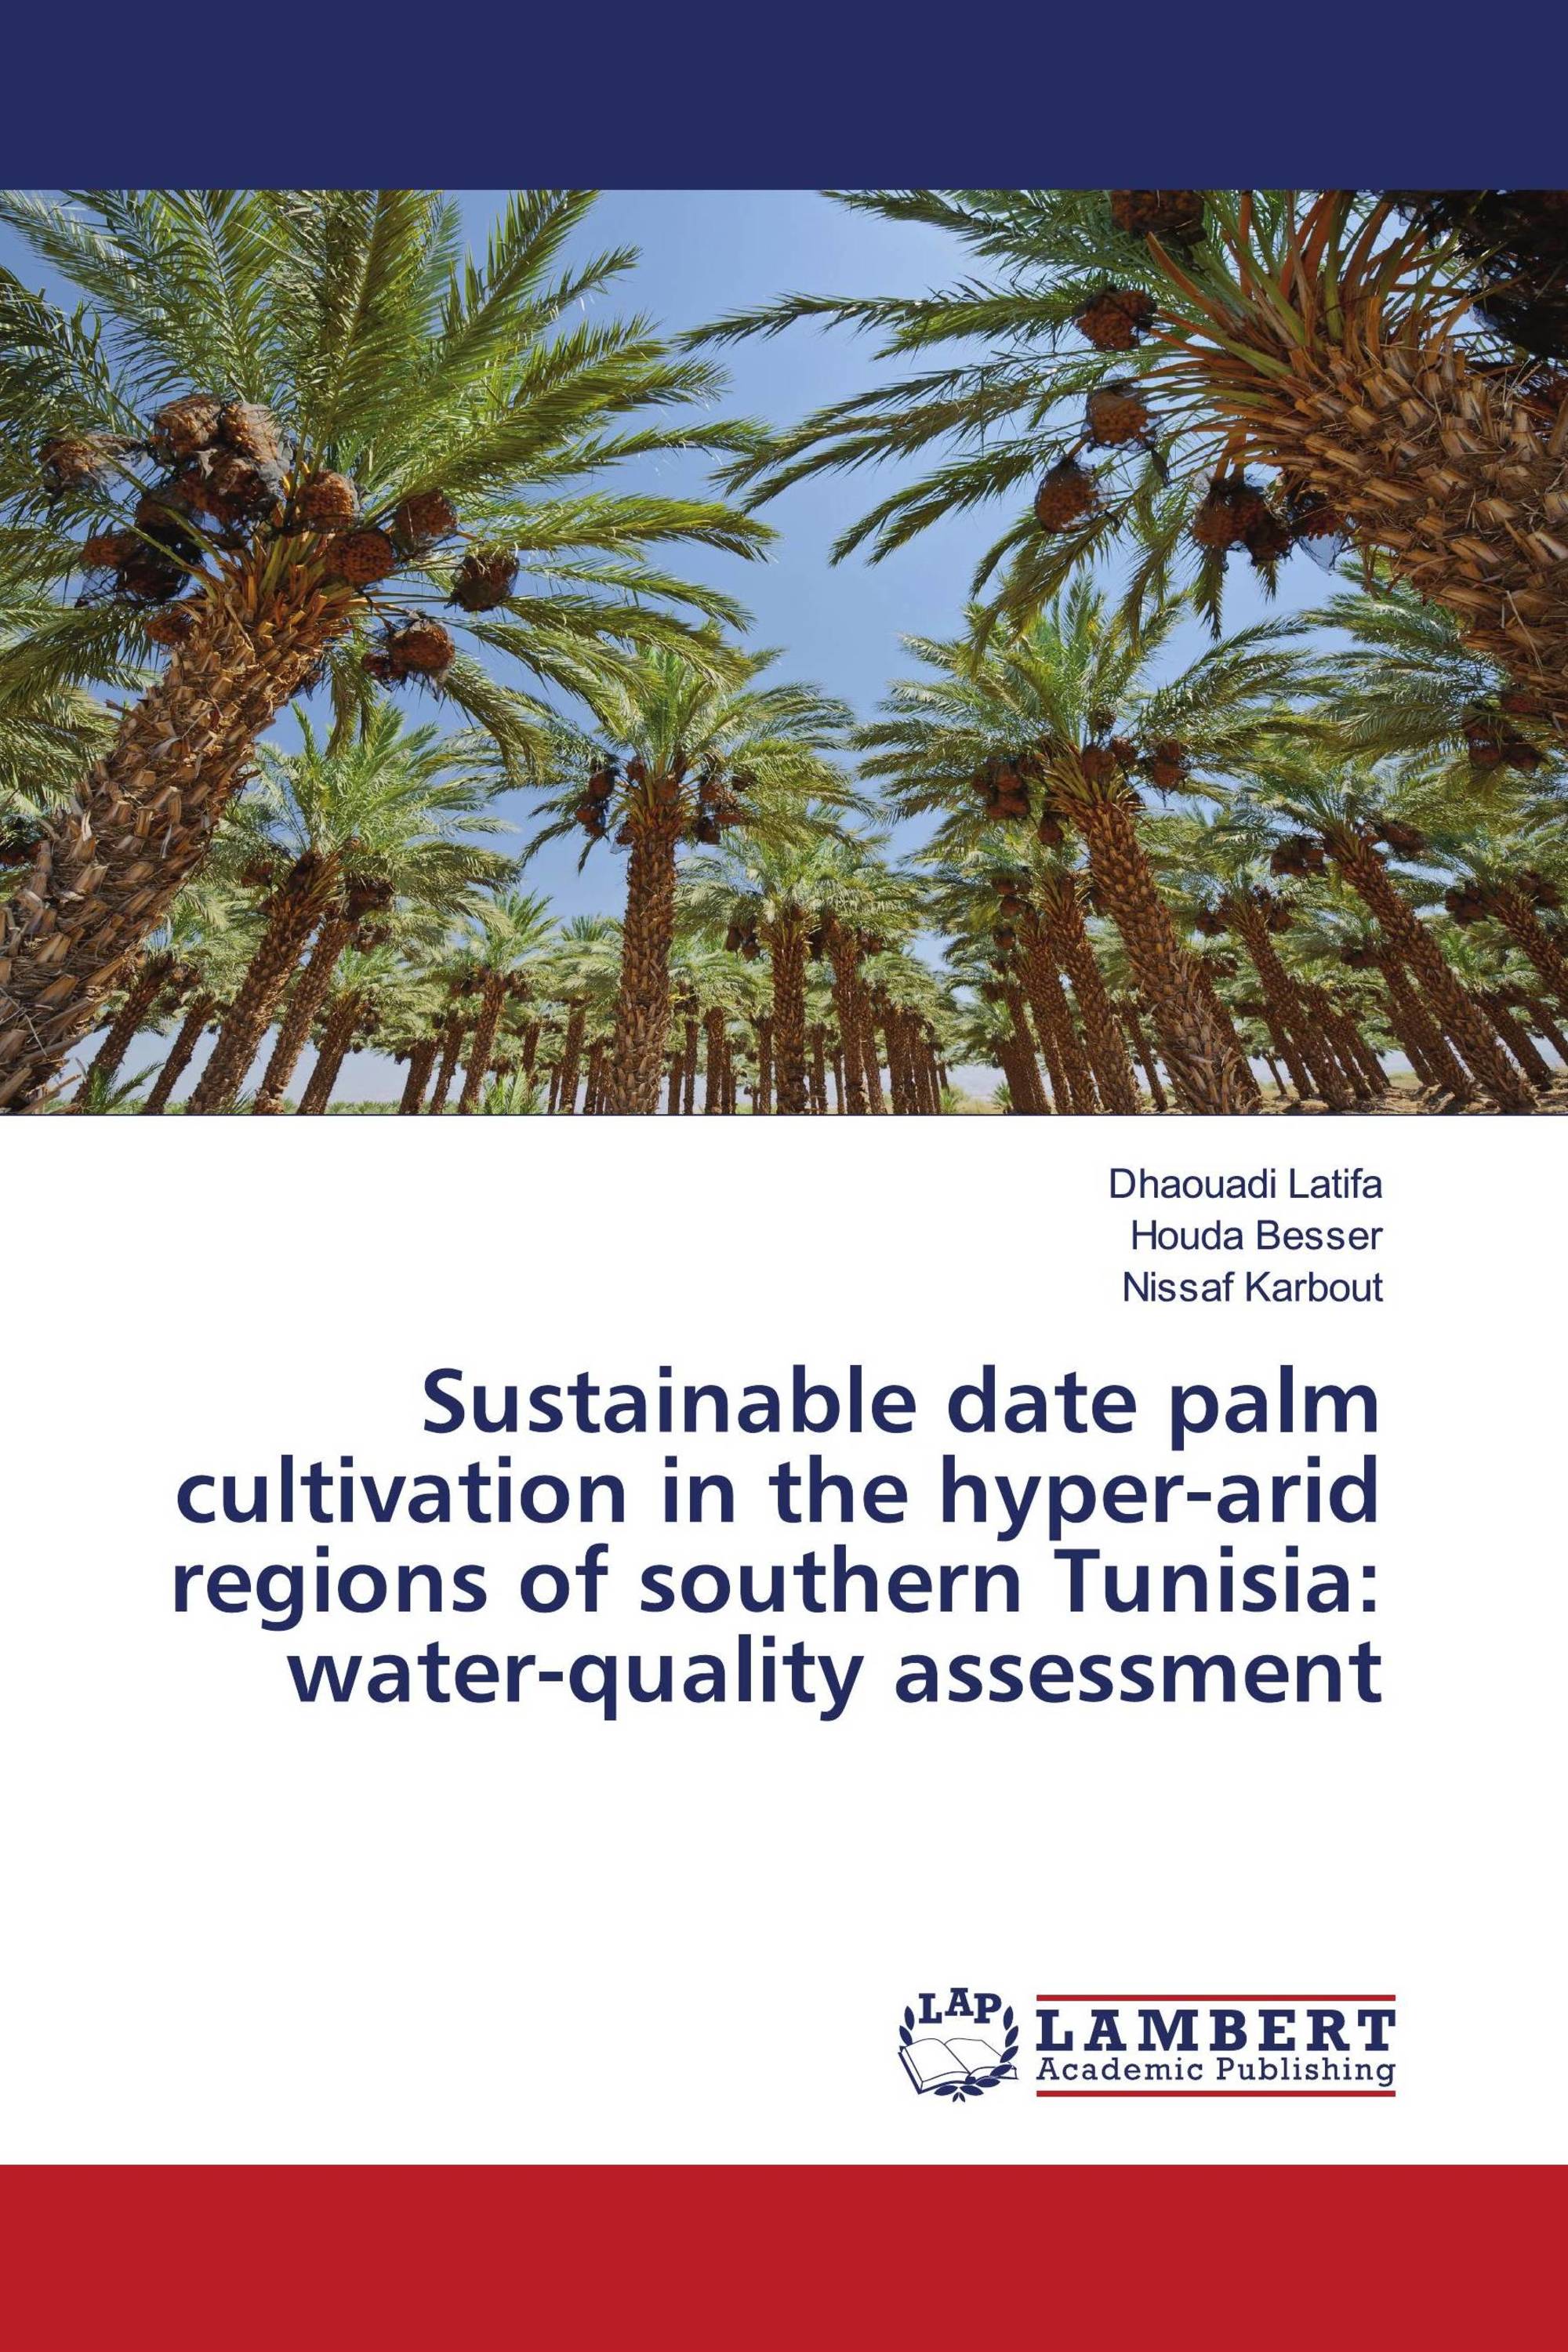 Sustainable date palm cultivation in the hyper-arid regions of southern Tunisia: water-quality assessment